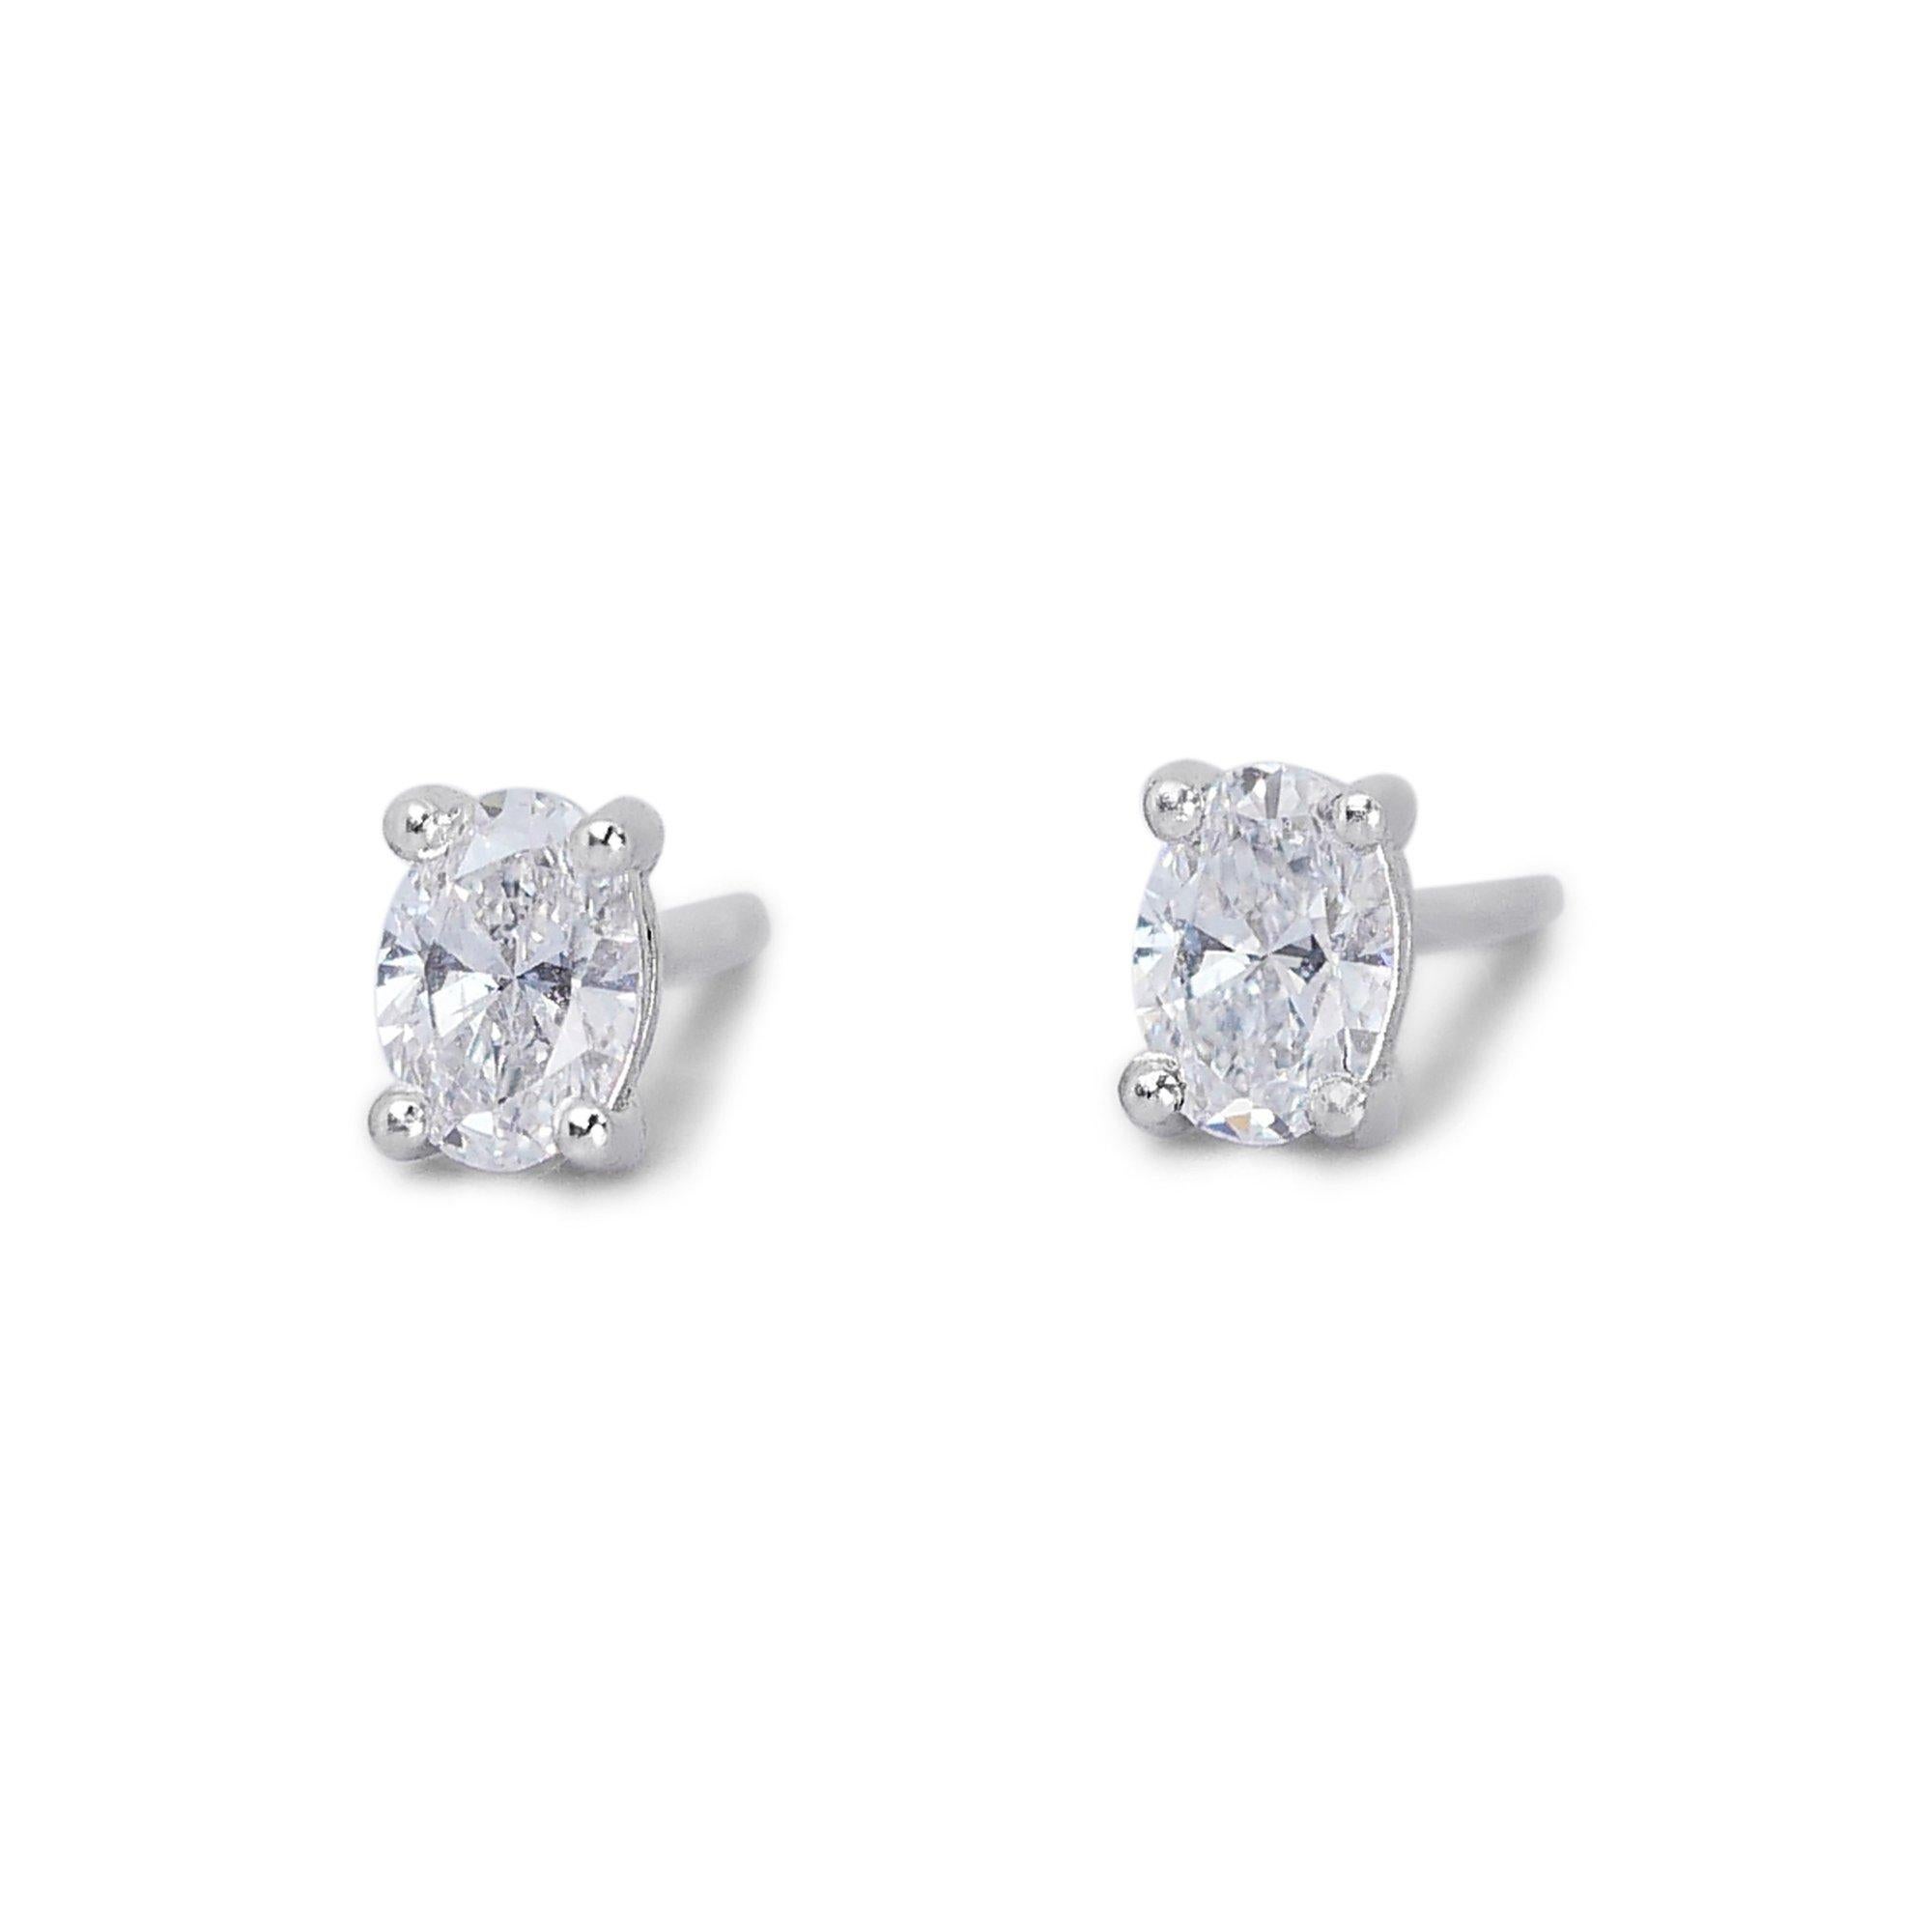 Exquisite 1.40ct Oval Diamond Stud Earrings in 18k White Gold - GIA Certified

Elevate your style with these breathtaking diamond stud earrings, masterfully crafted in 18k white gold. Each earring is set with an oval-shaped diamond, totaling